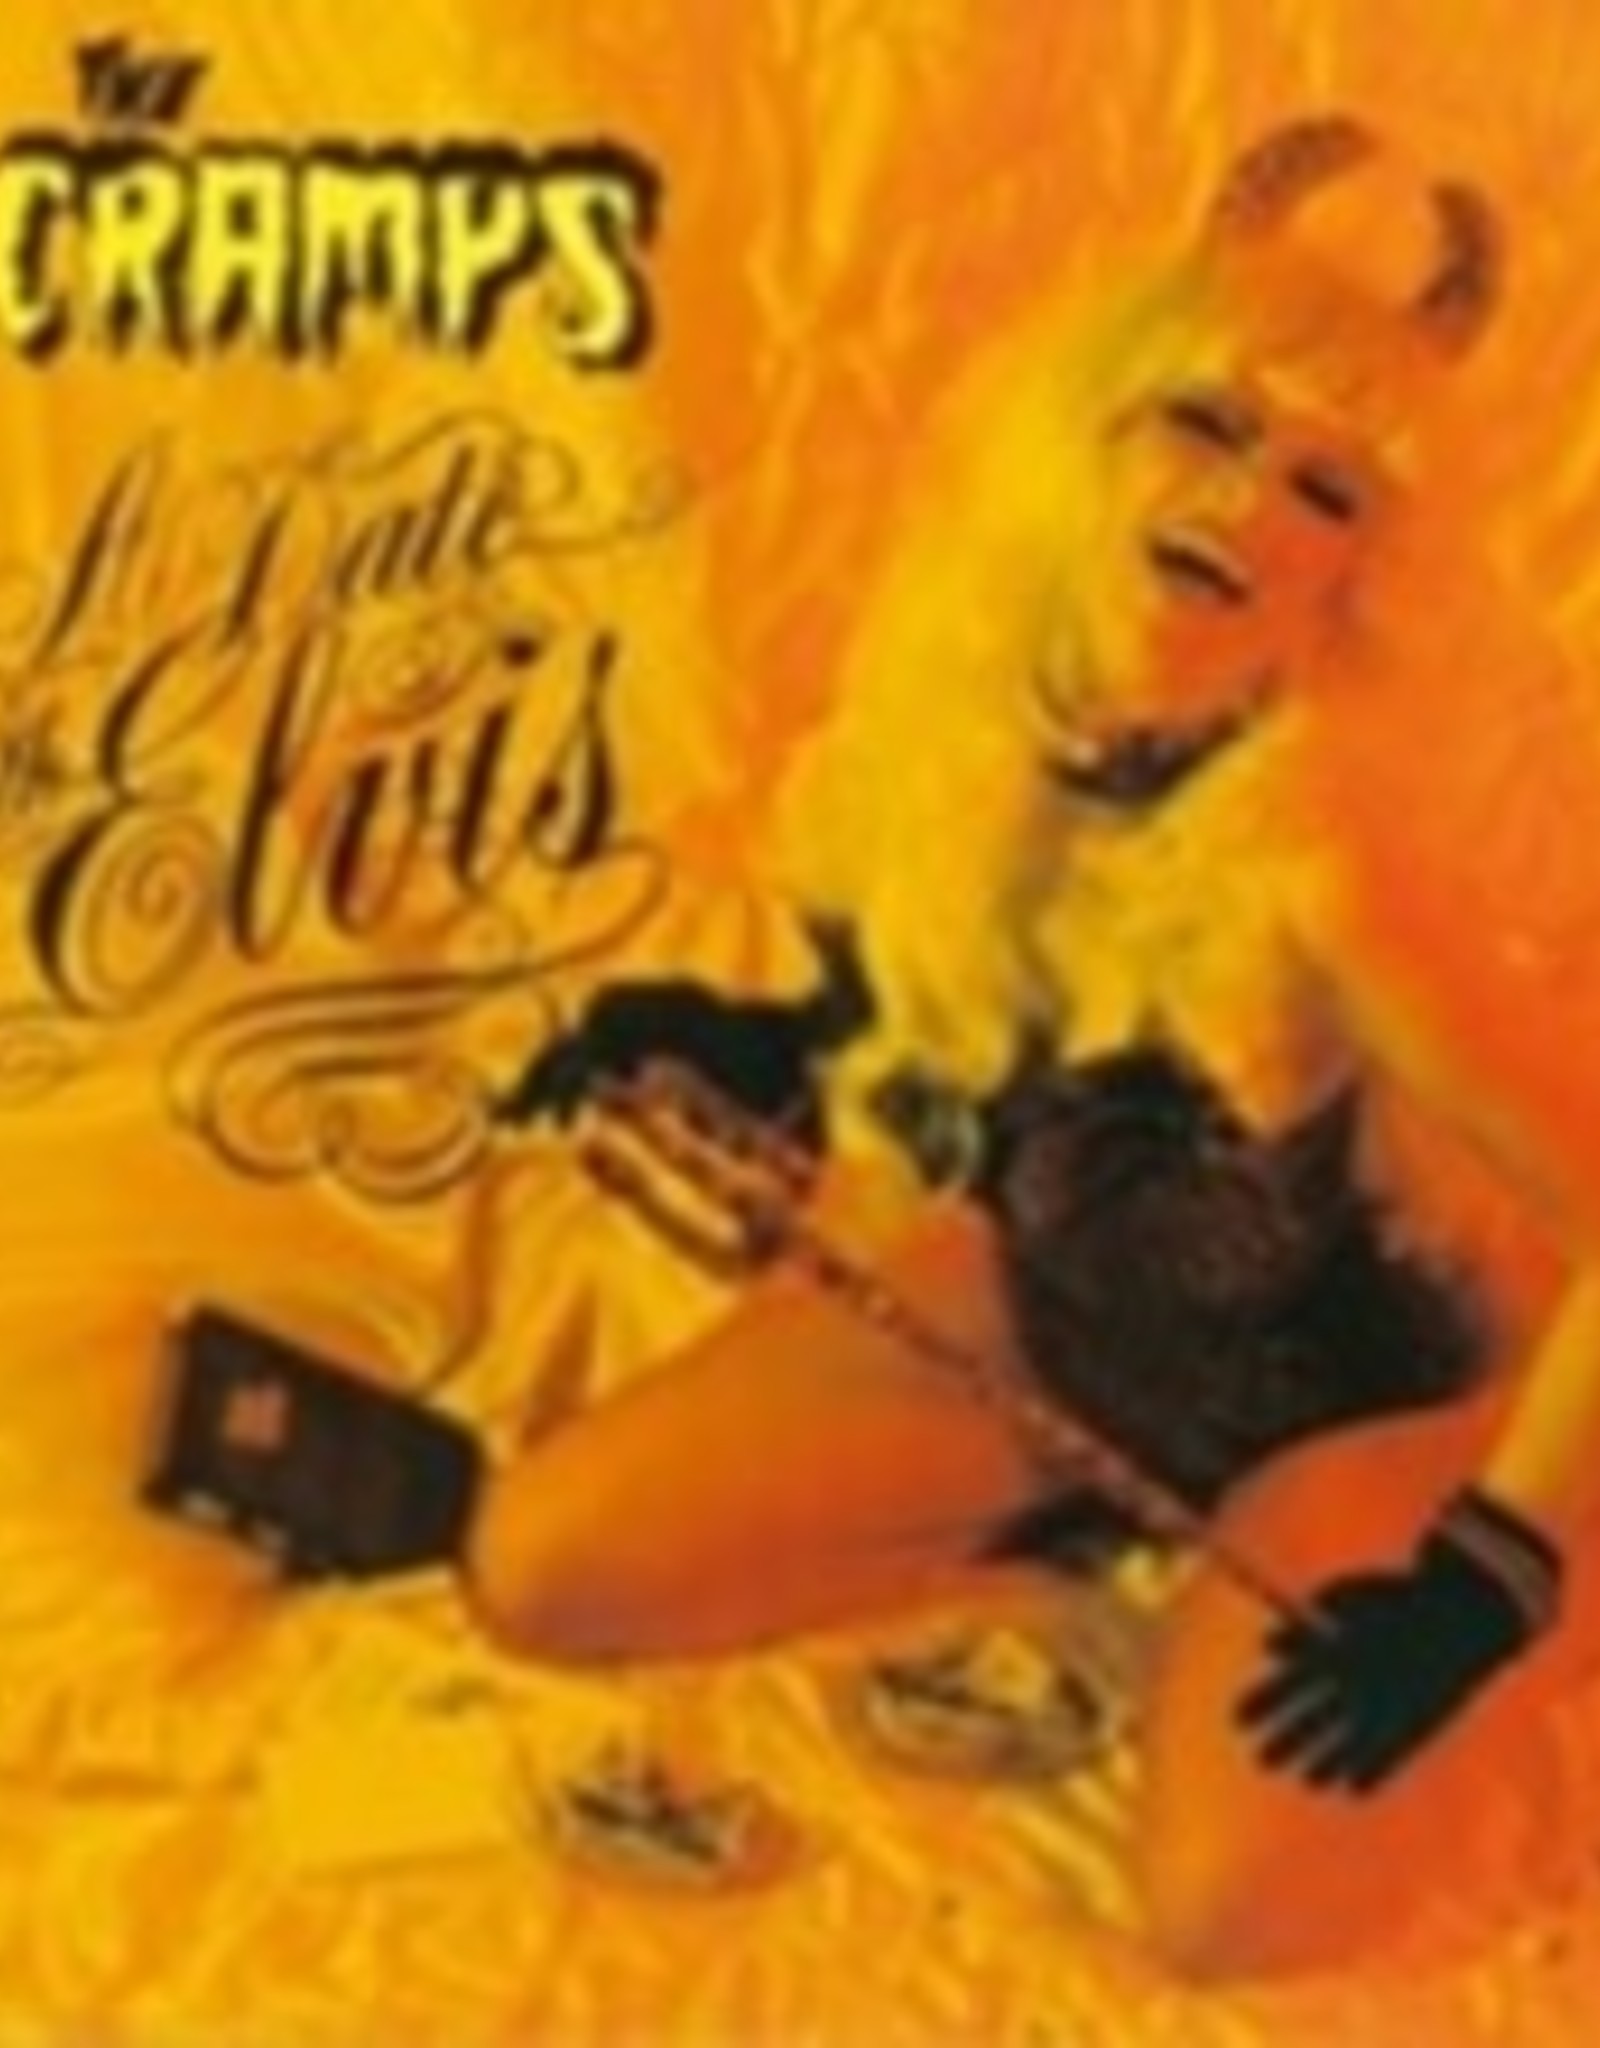 The Cramps - Date with Elvis